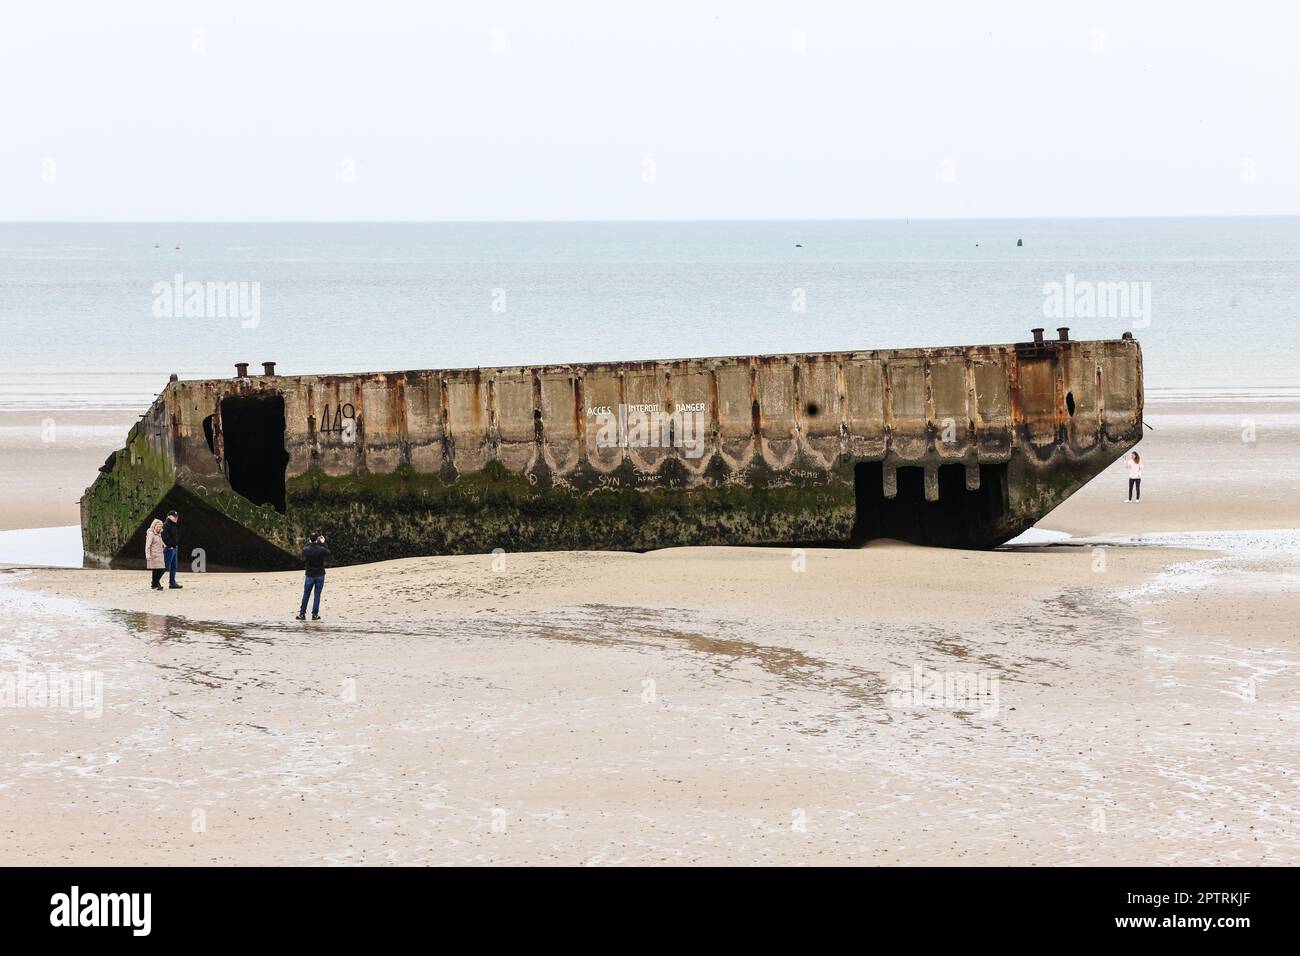 Operation Mulberry,Mulberry,artificial,portable,harbour,port,remains,from,WW II,Second World War,beach,at,Gold Beach,Arromanches,Arromanches-les-Bains,Normandy,Normandie,France,French,Europe,European in,Calvados,department,Normandy,Normandie,France,French,Europe,European, Stock Photo